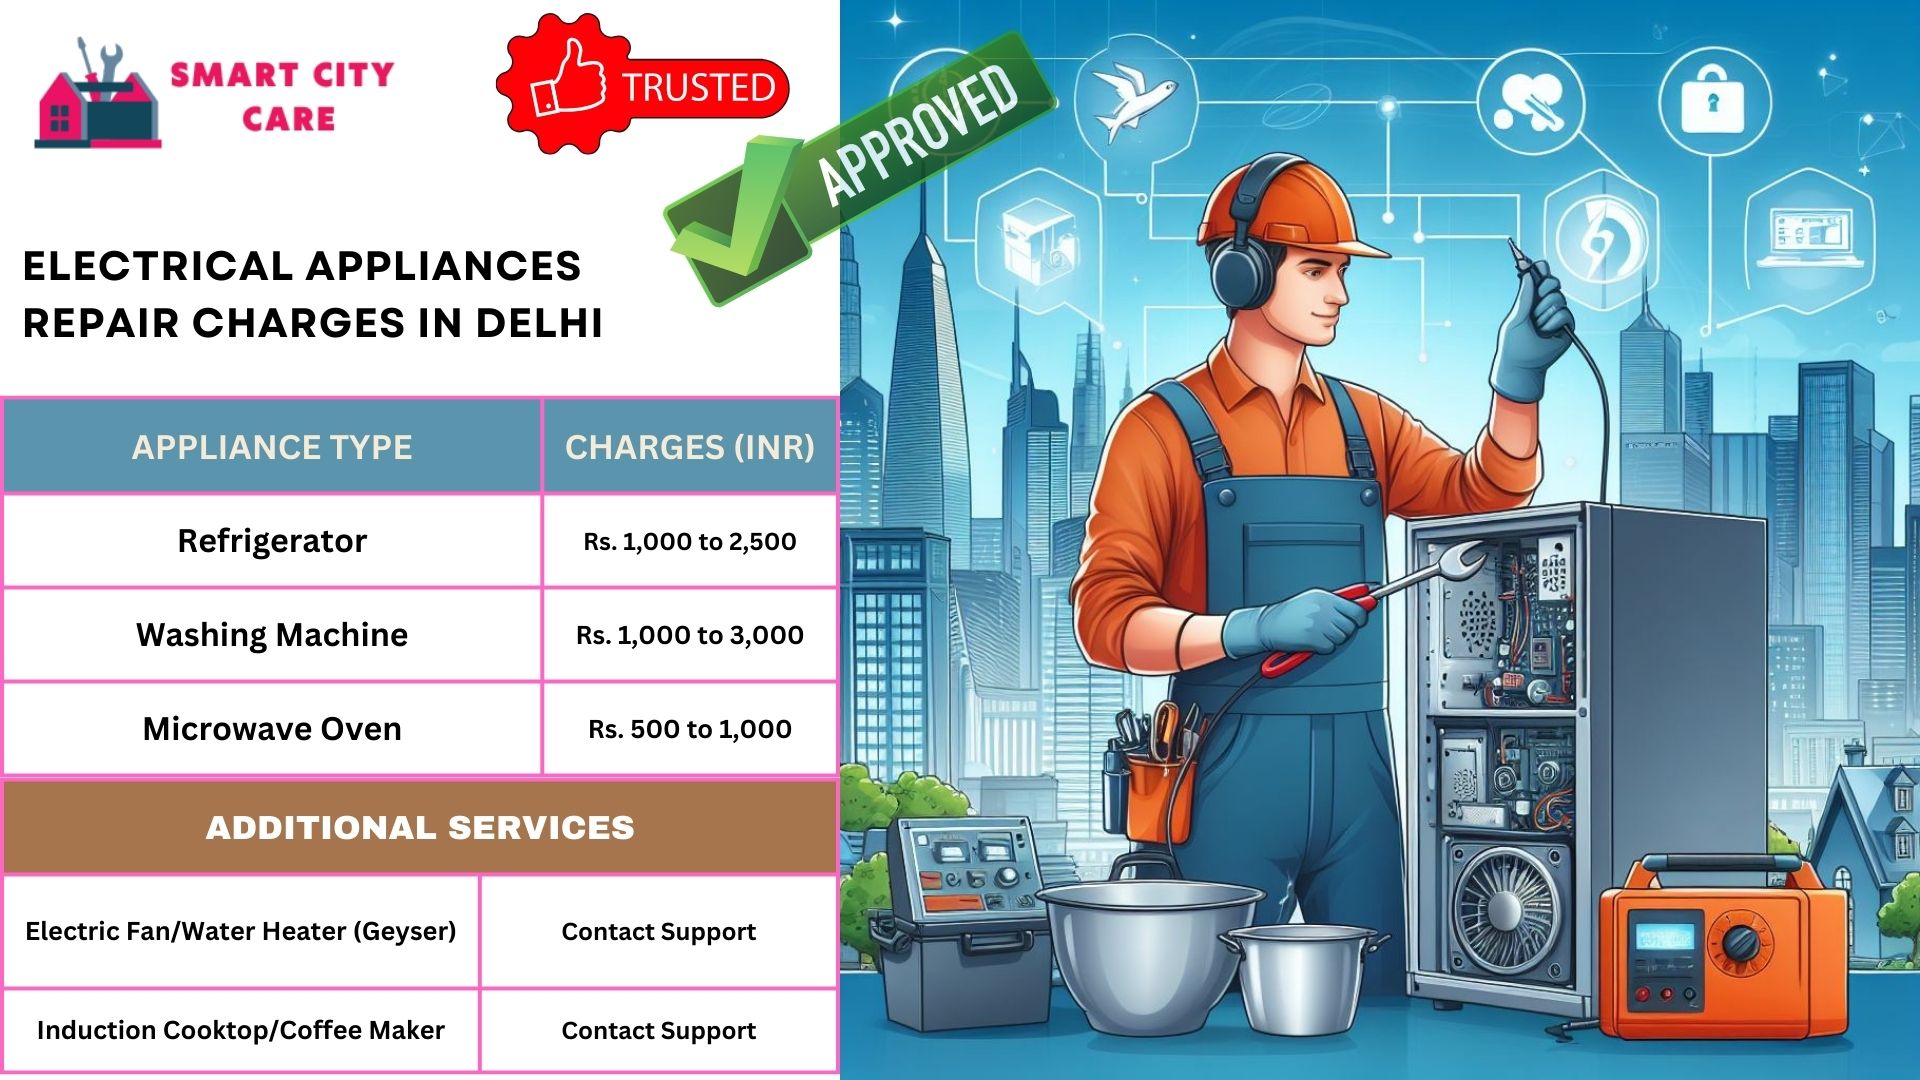 Home Electrical Appliances Repair Services Charges in Delhi